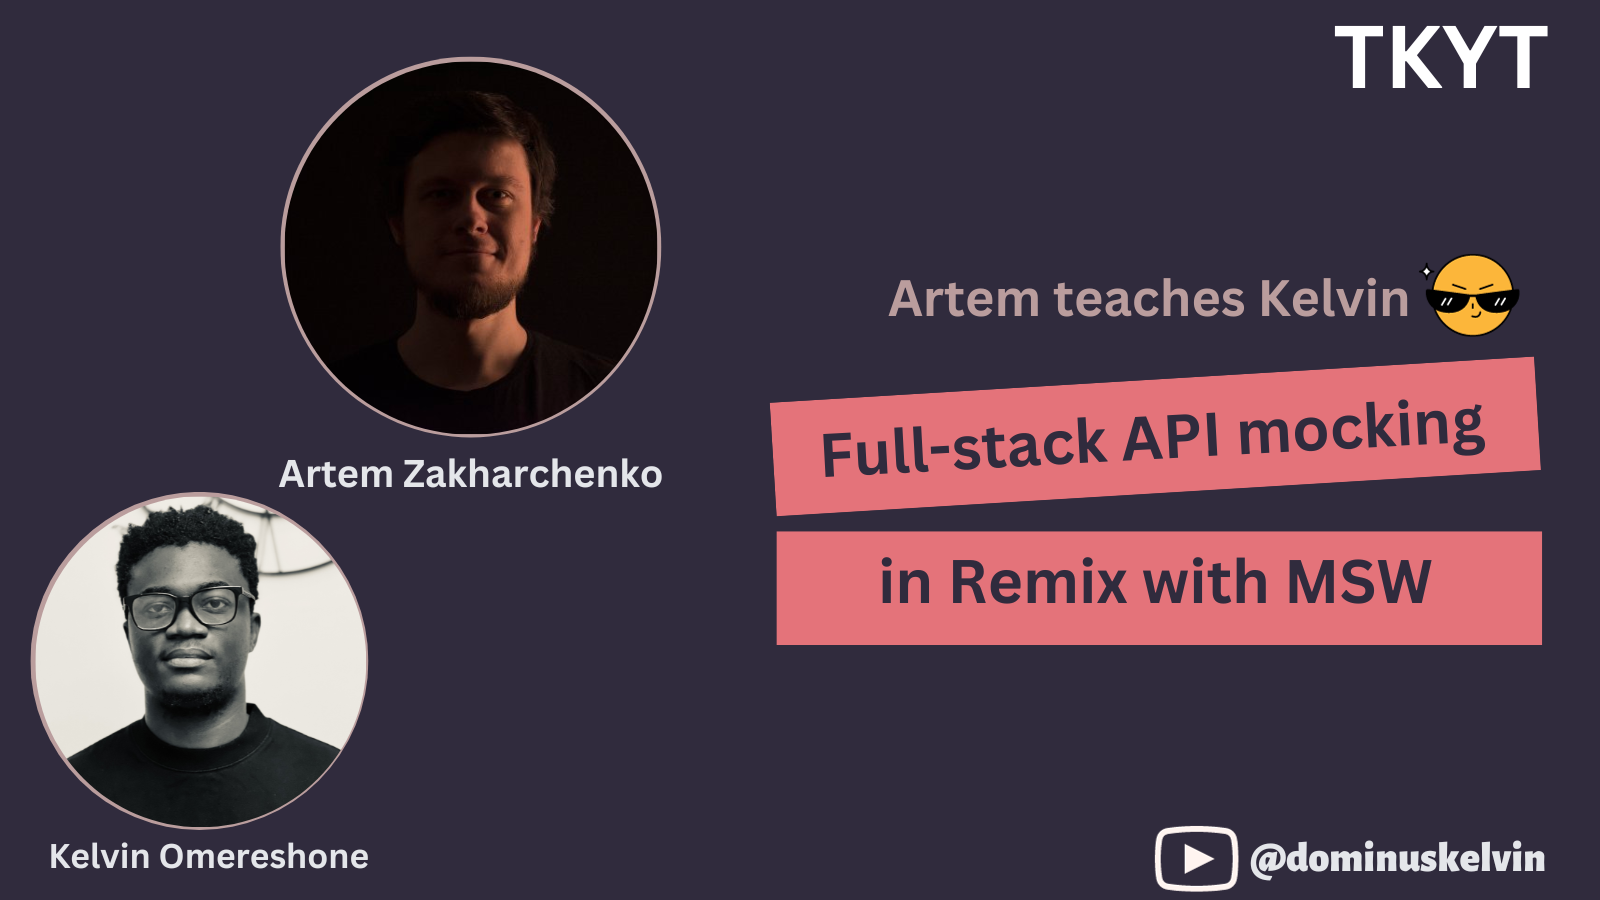 Full-stack API mocking in Remix with MSW